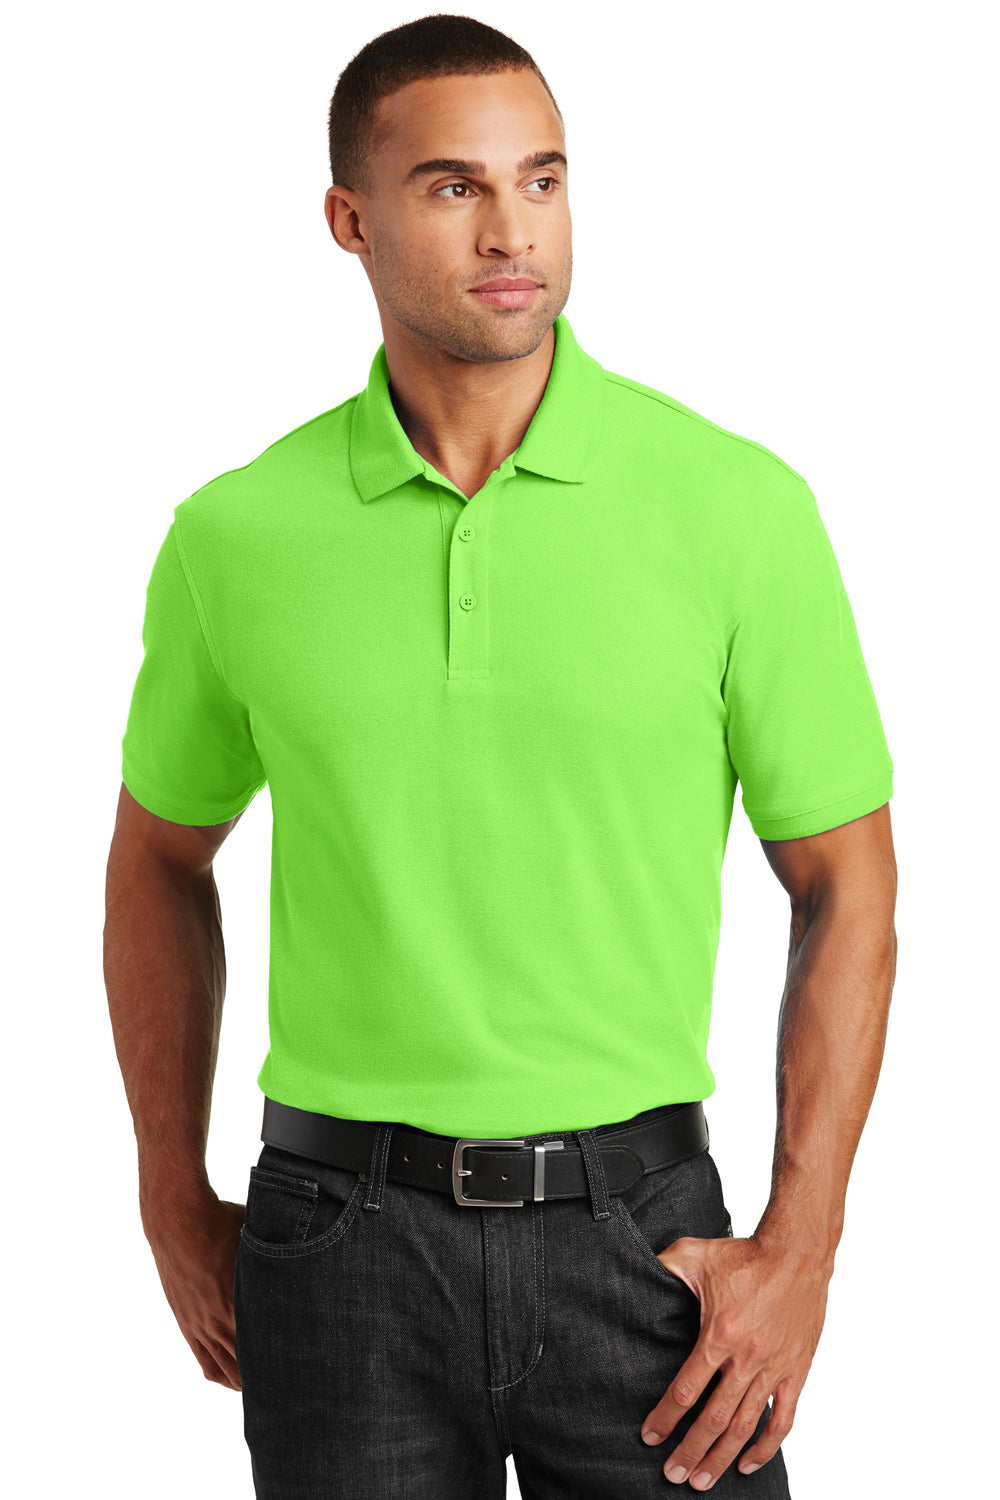 Port Authority K100 Mens Core Classic Short Sleeve Polo Shirt Lime Green Front